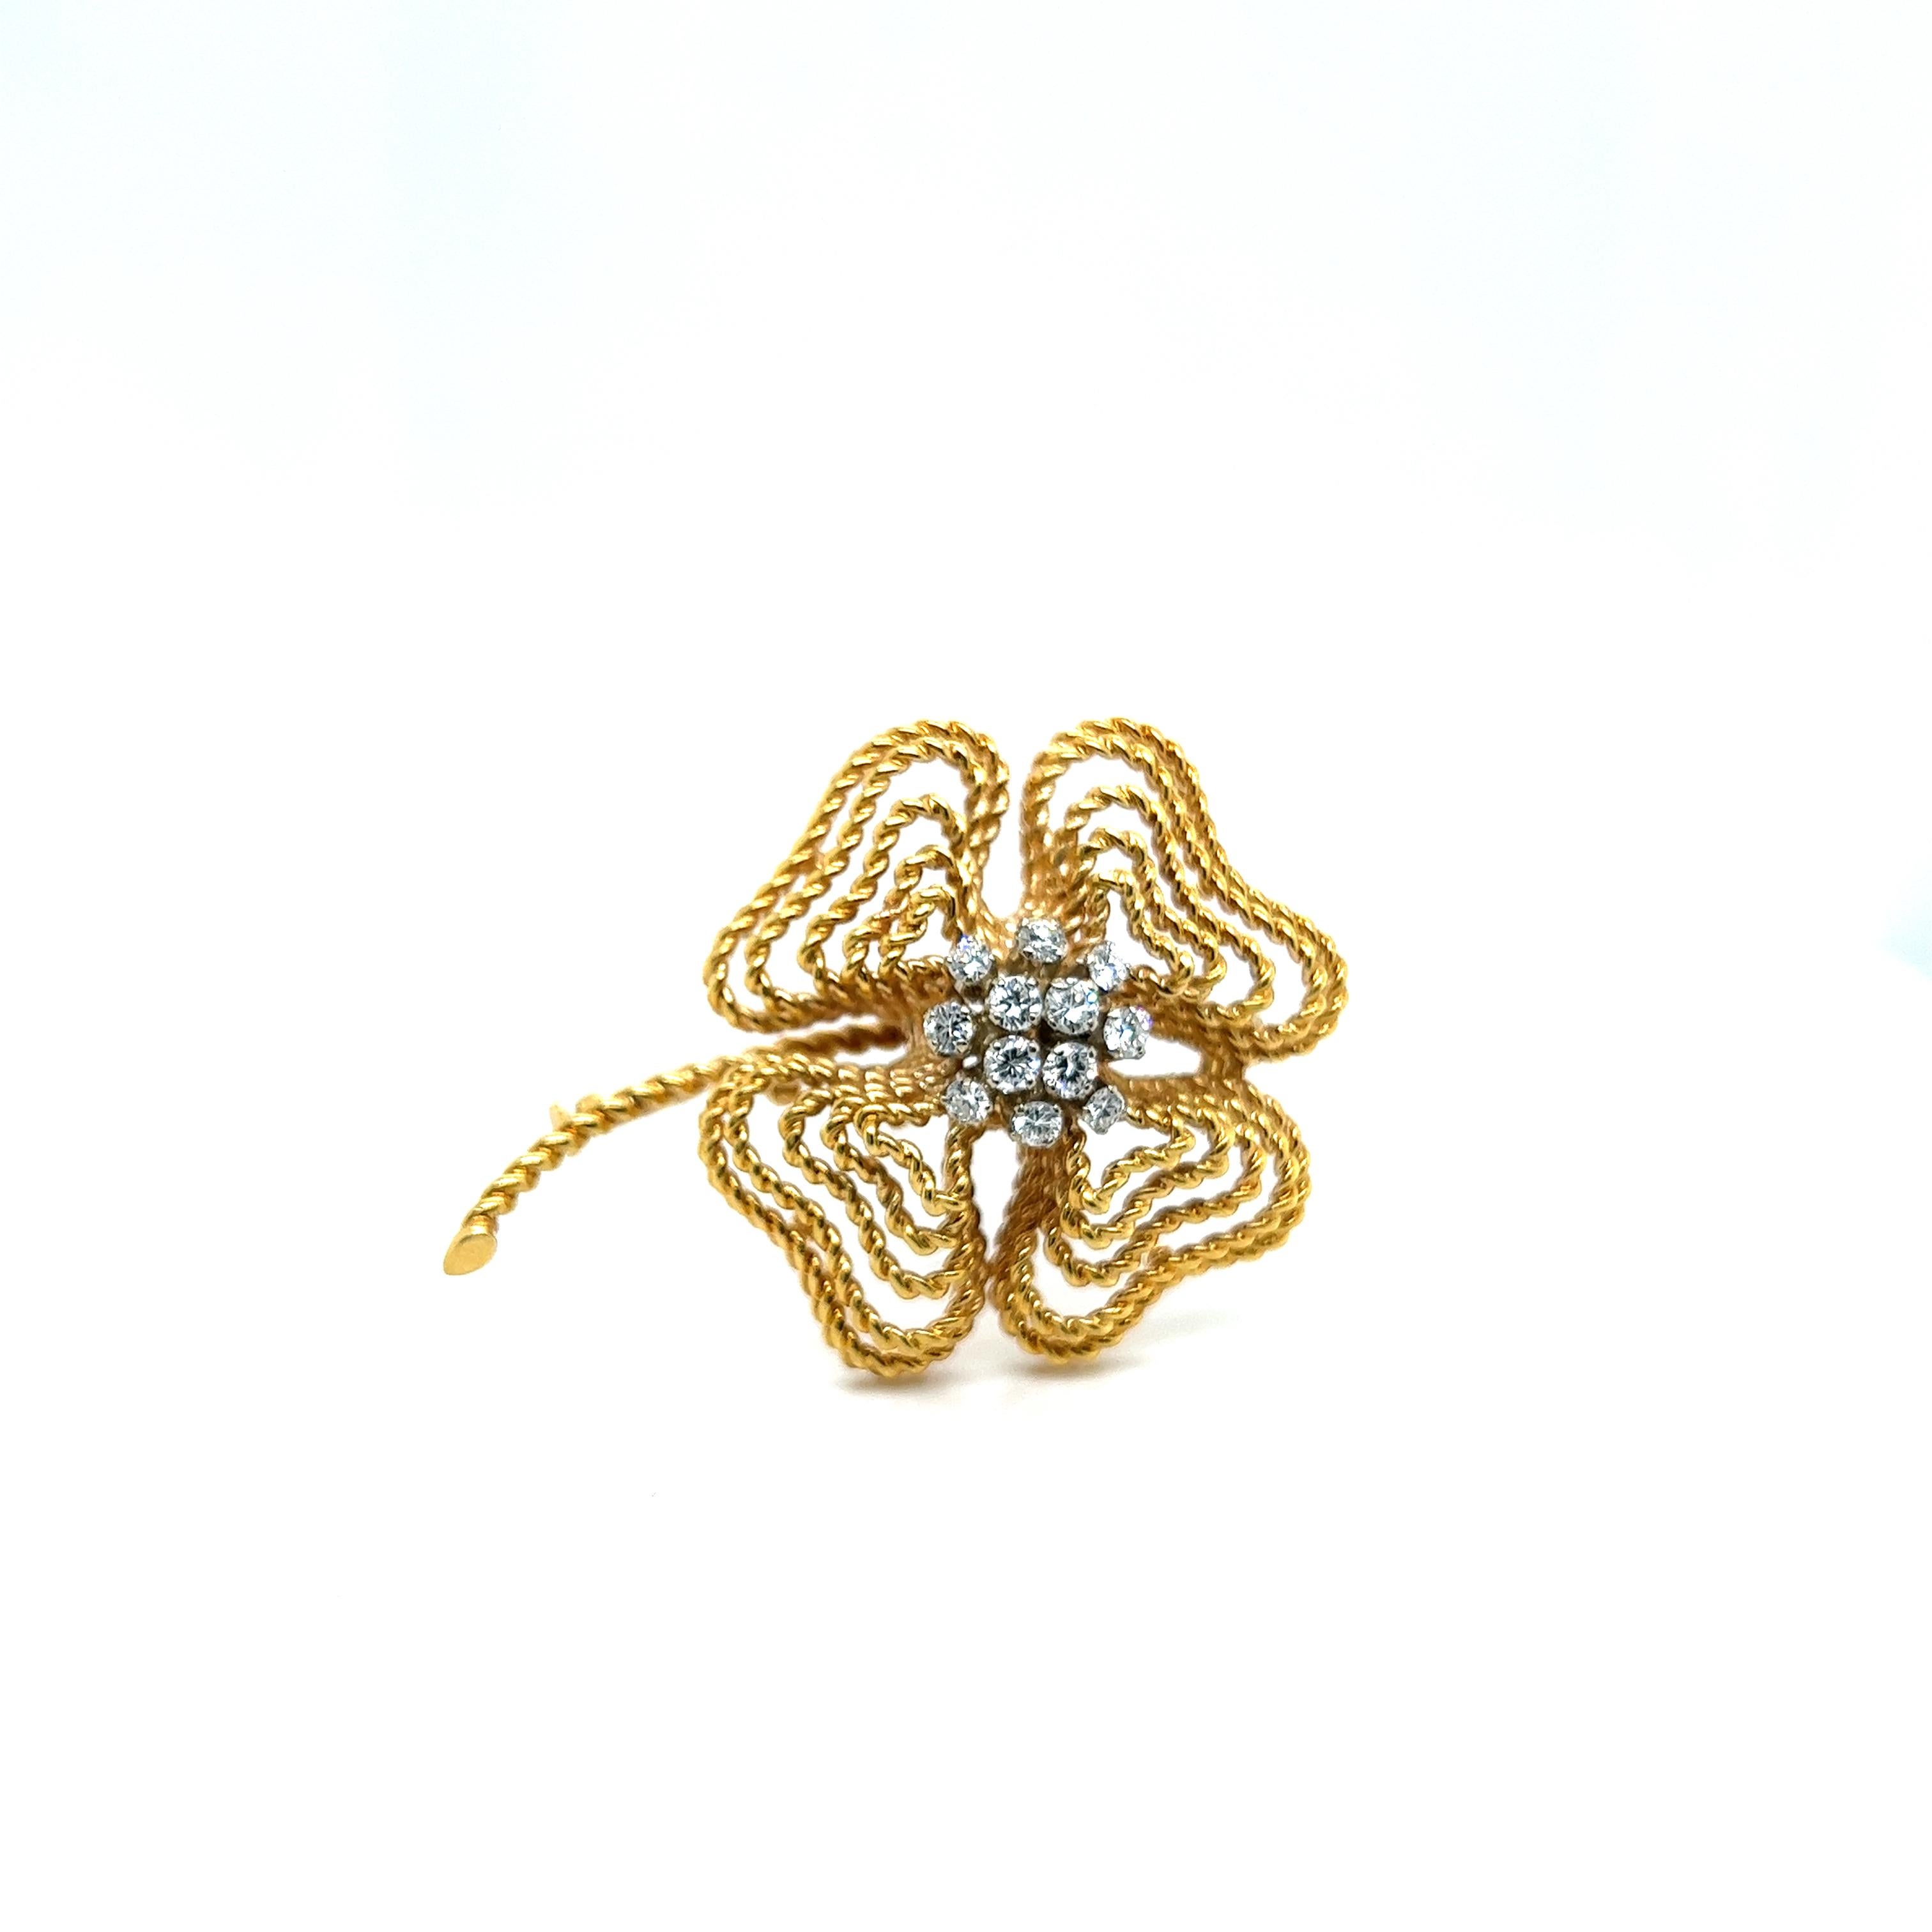 This clover brooch with diamonds in 18 Karat yellow and white gold is a masterpiece of craftsmanship. design of the twisted felsic gold chain gives it texture and sophistication, while the central cluster of 0.72 carat diamonds, framed in white gold